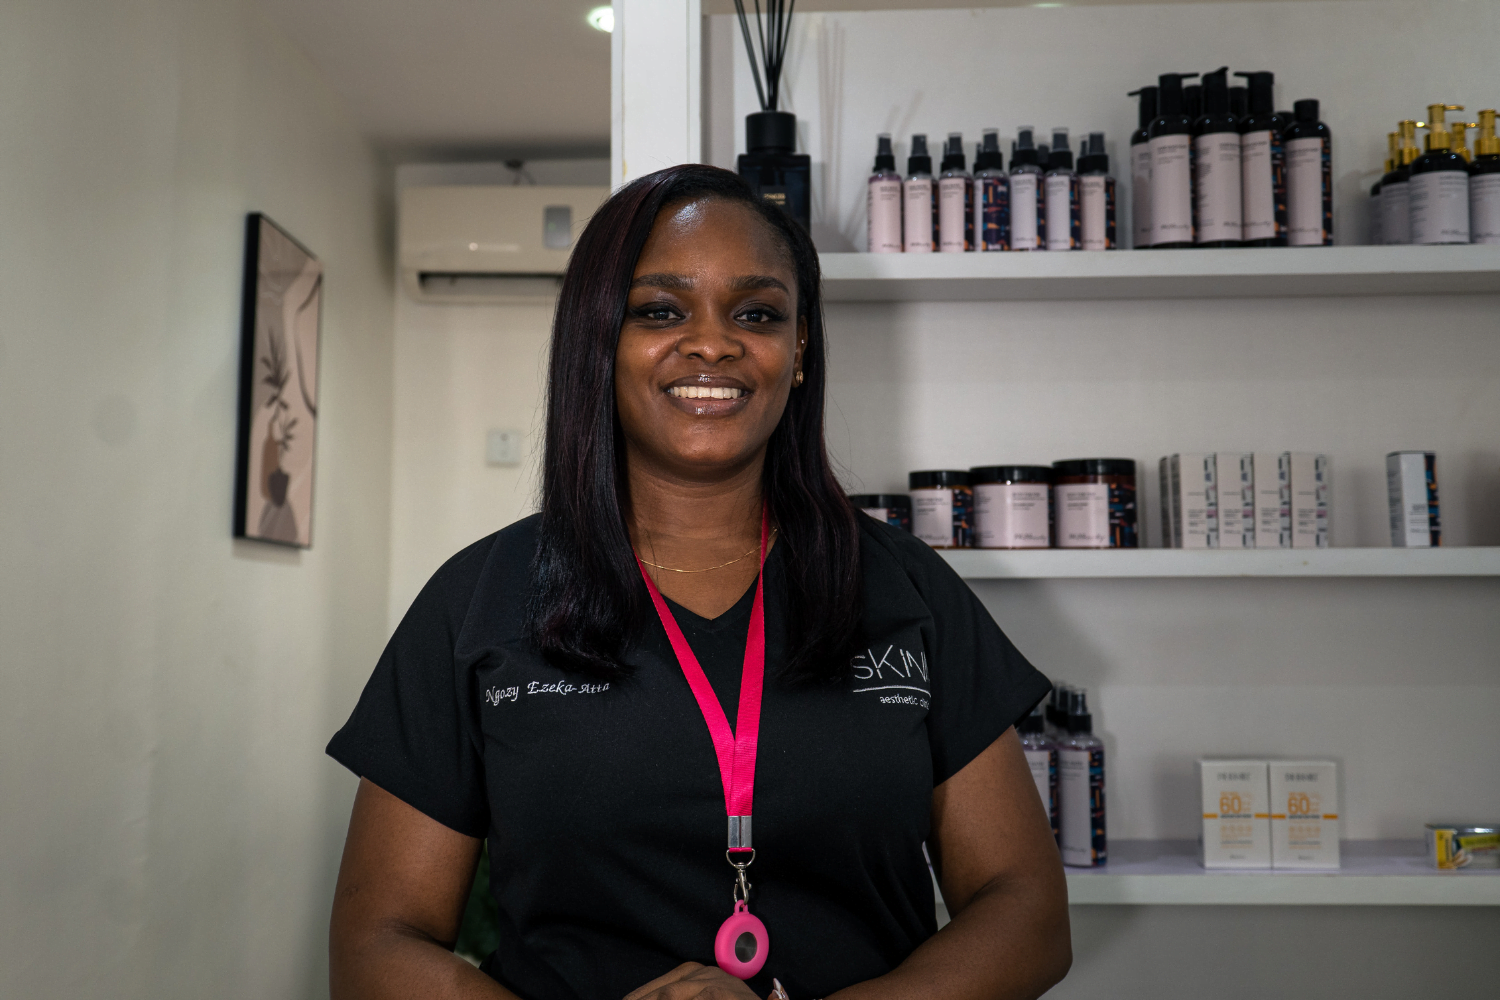 Ngozy Ezeka-Atta, Owner of Jaga Beauty in Lagos, Nigeria smiles in front of beauty products.